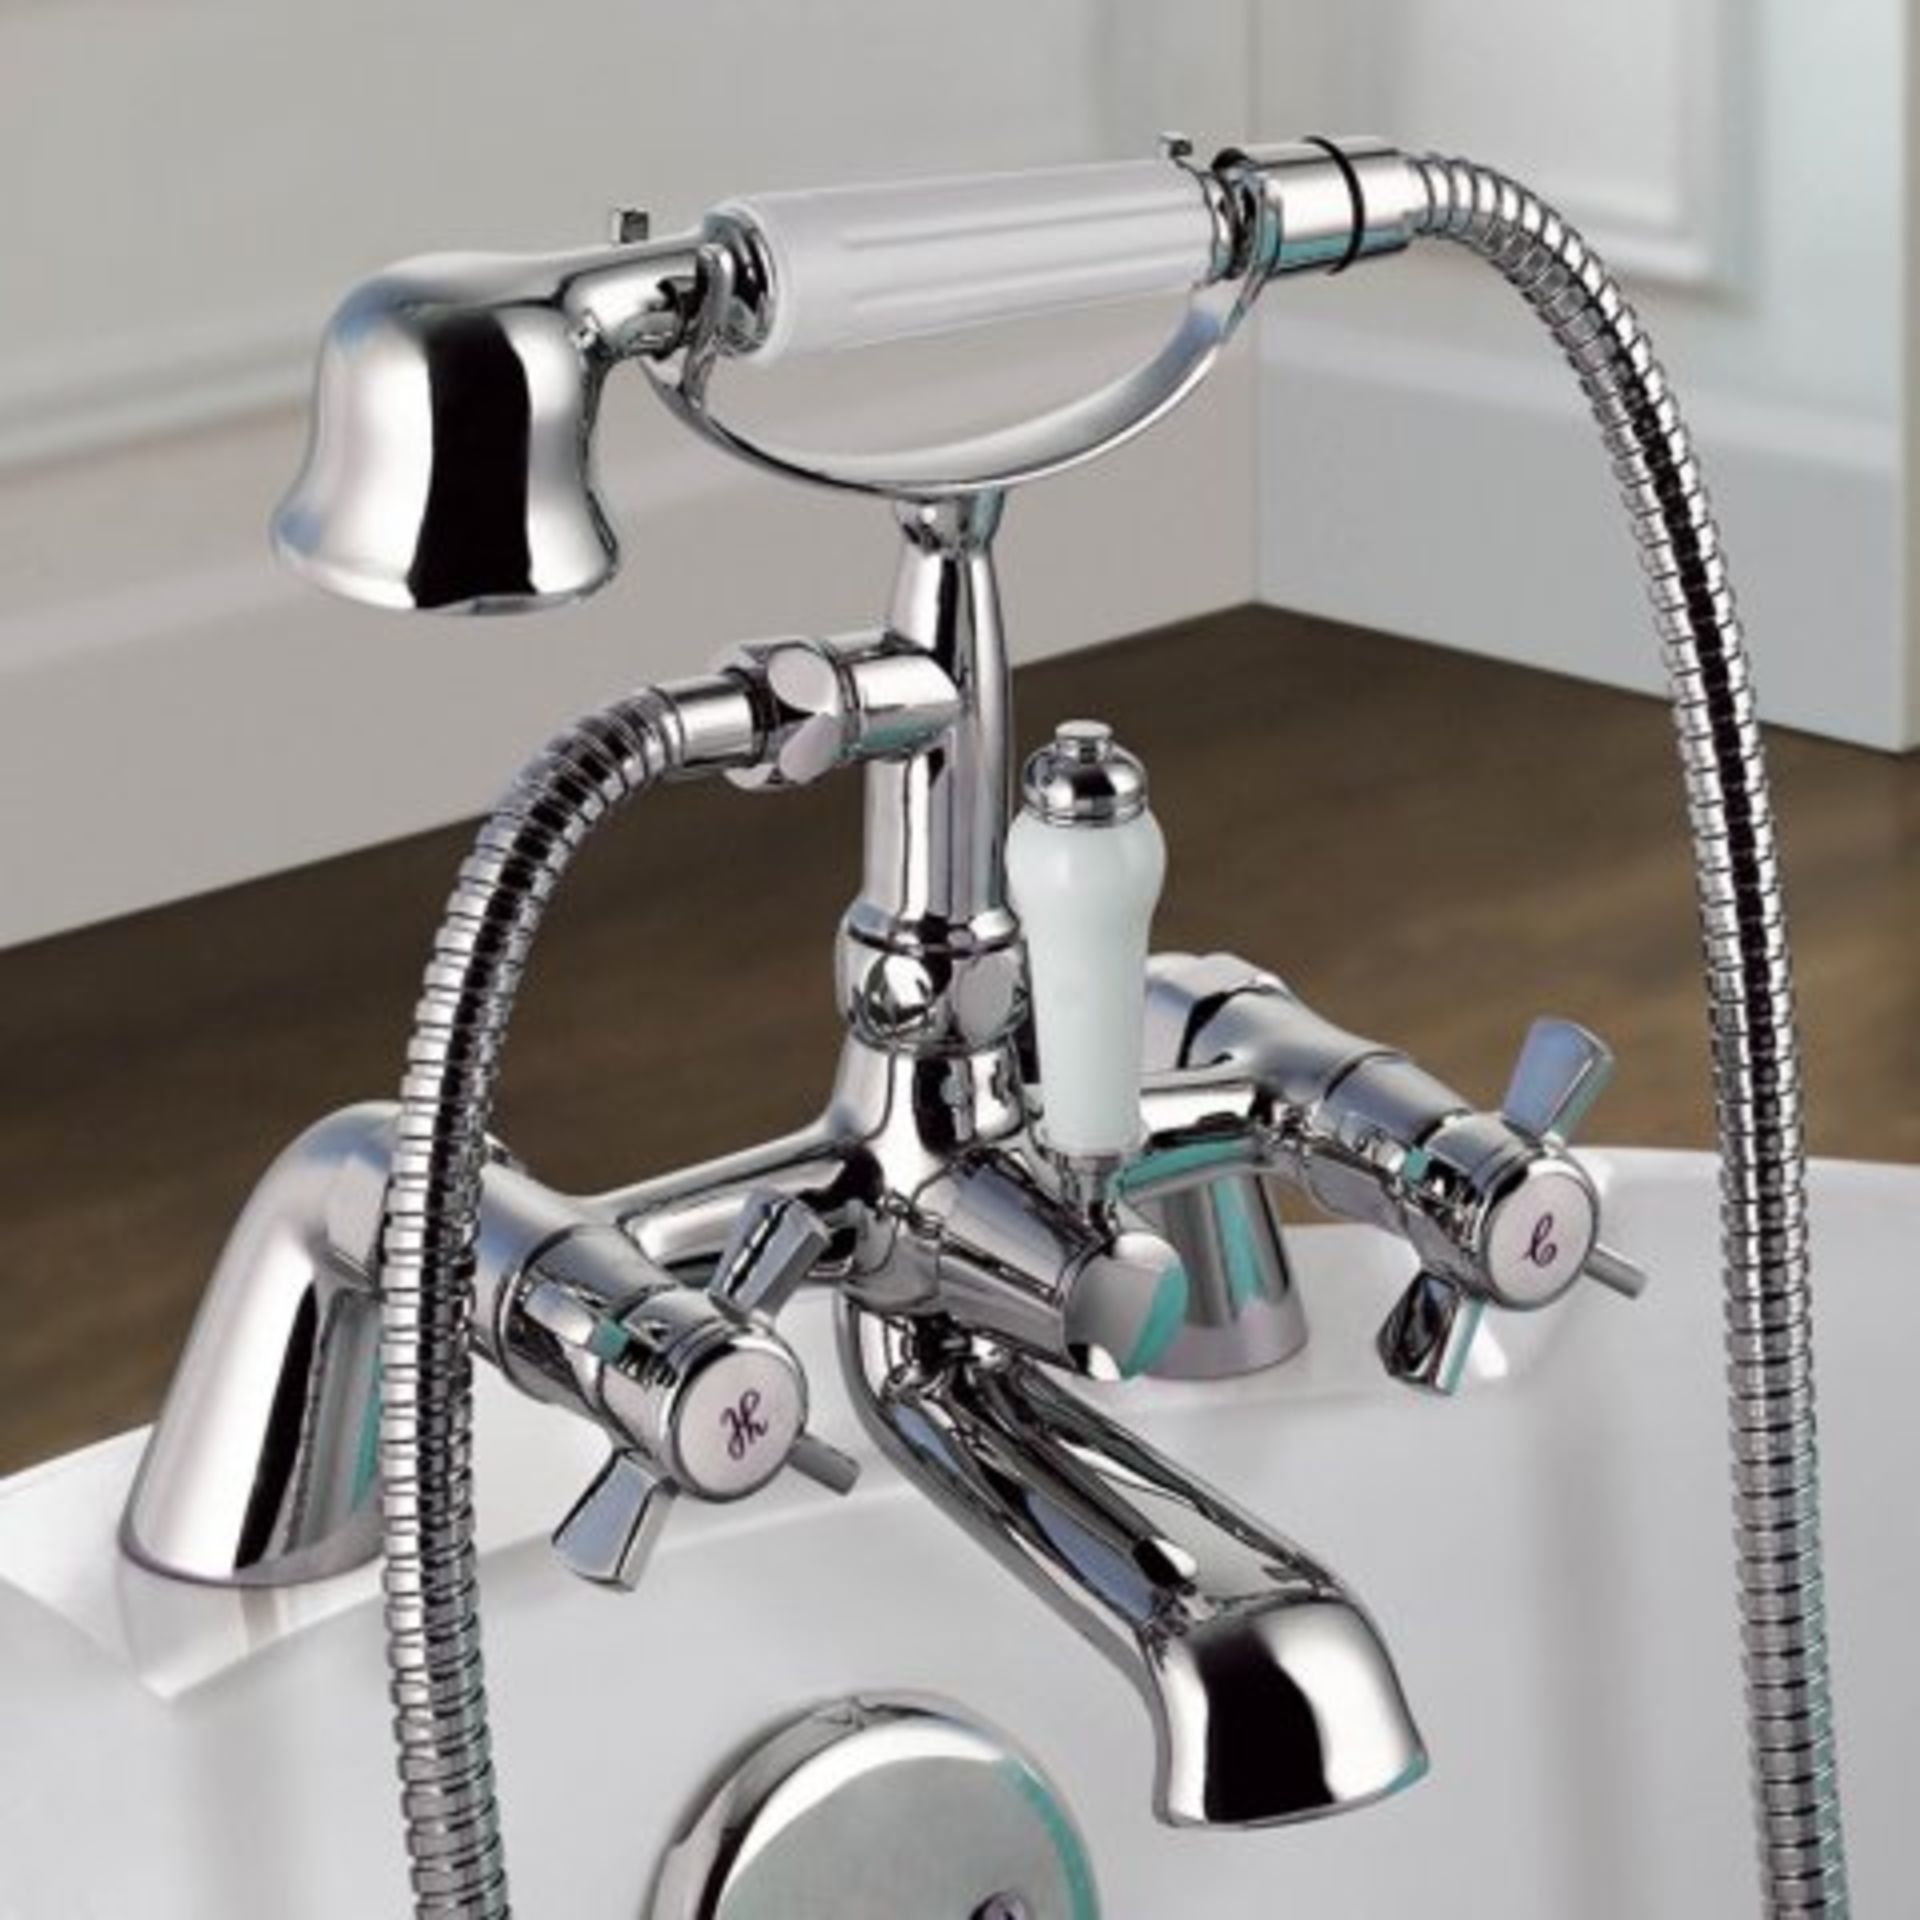 (I64) Cambridge Traditional Bath Mixer Tap with Hand Held Shower Our great range of traditional taps